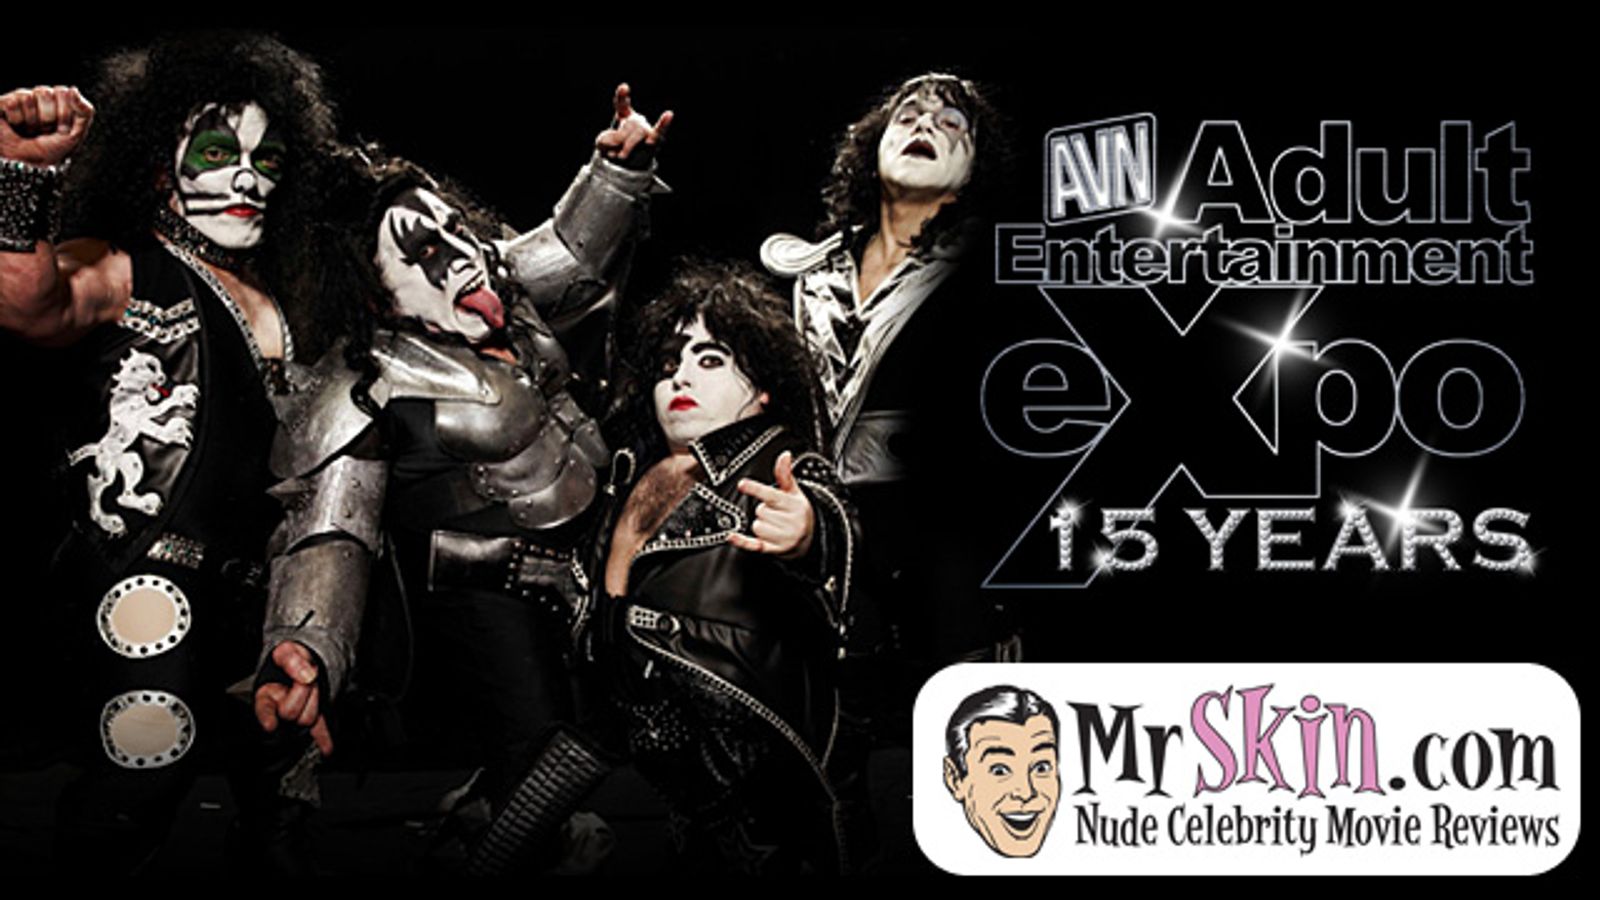 Legendary Cover Group Mini KISS to Perform at AEE Party